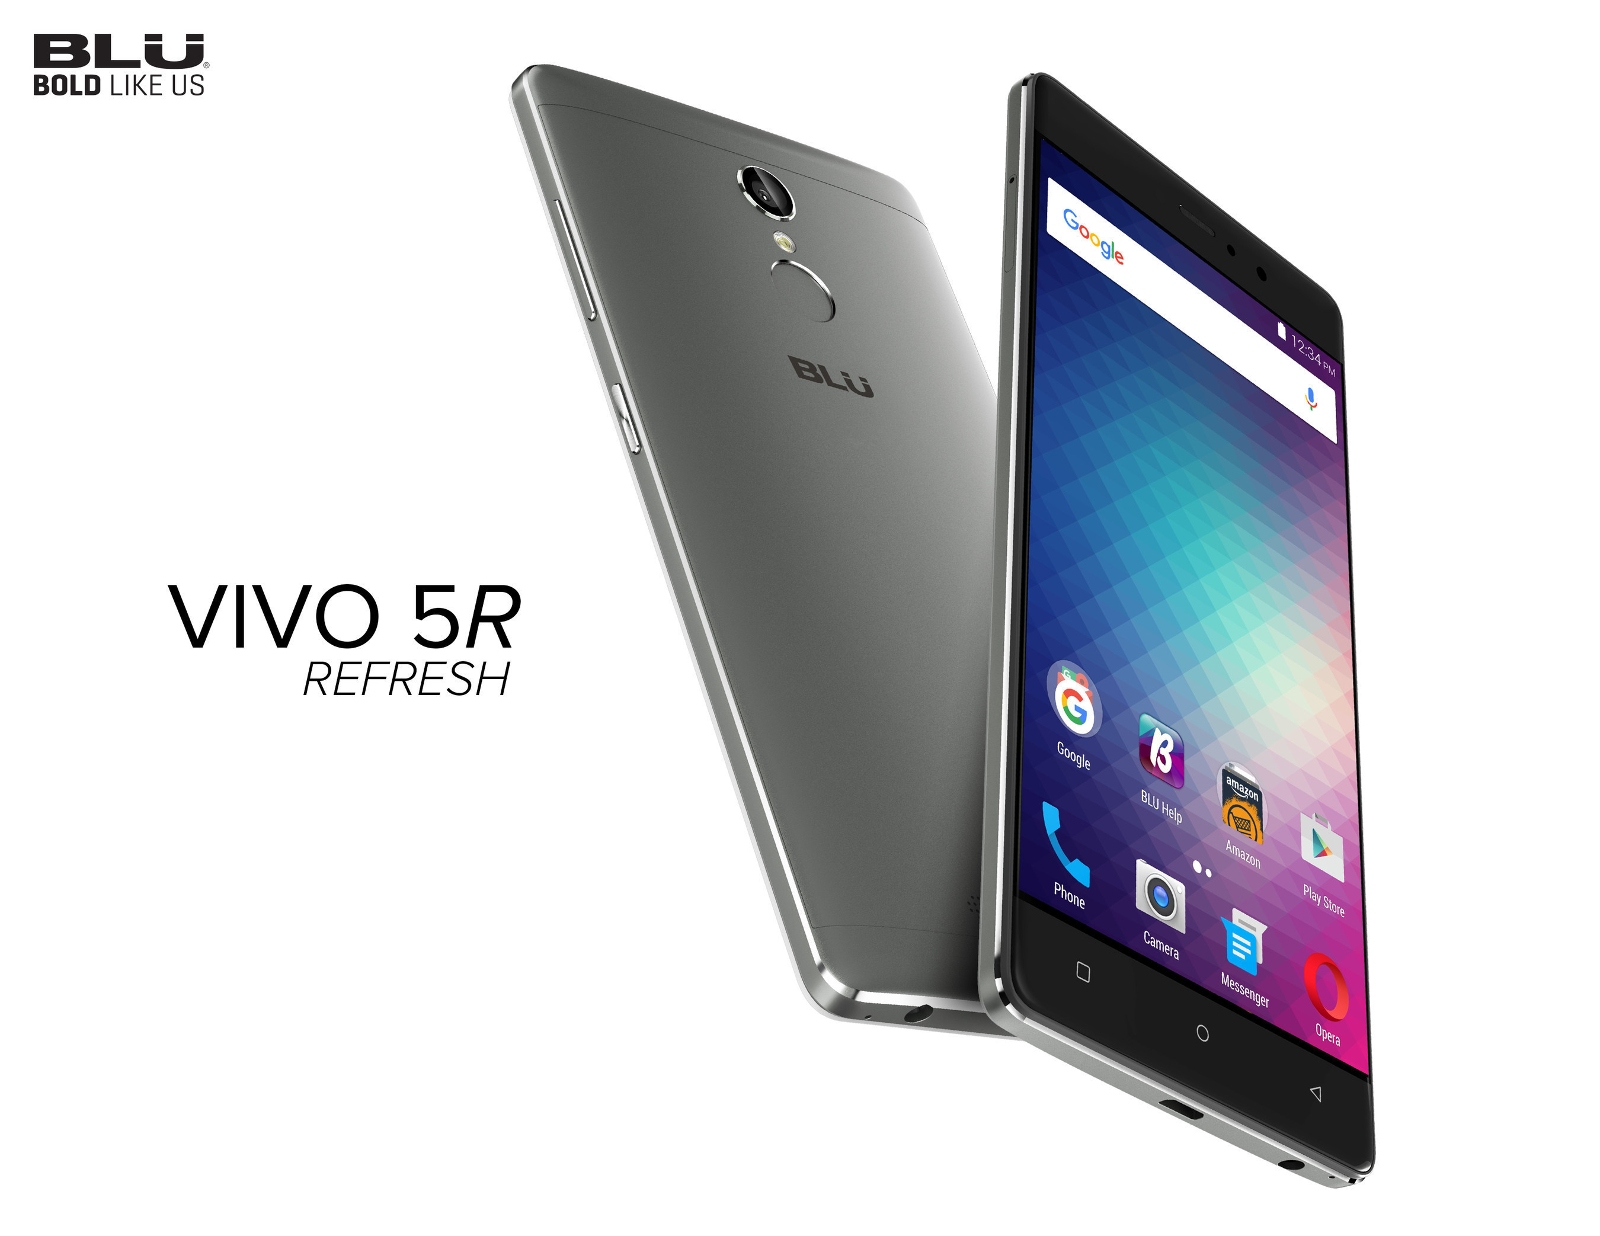 vivo 5r - for some reason we don't have an alt tag here